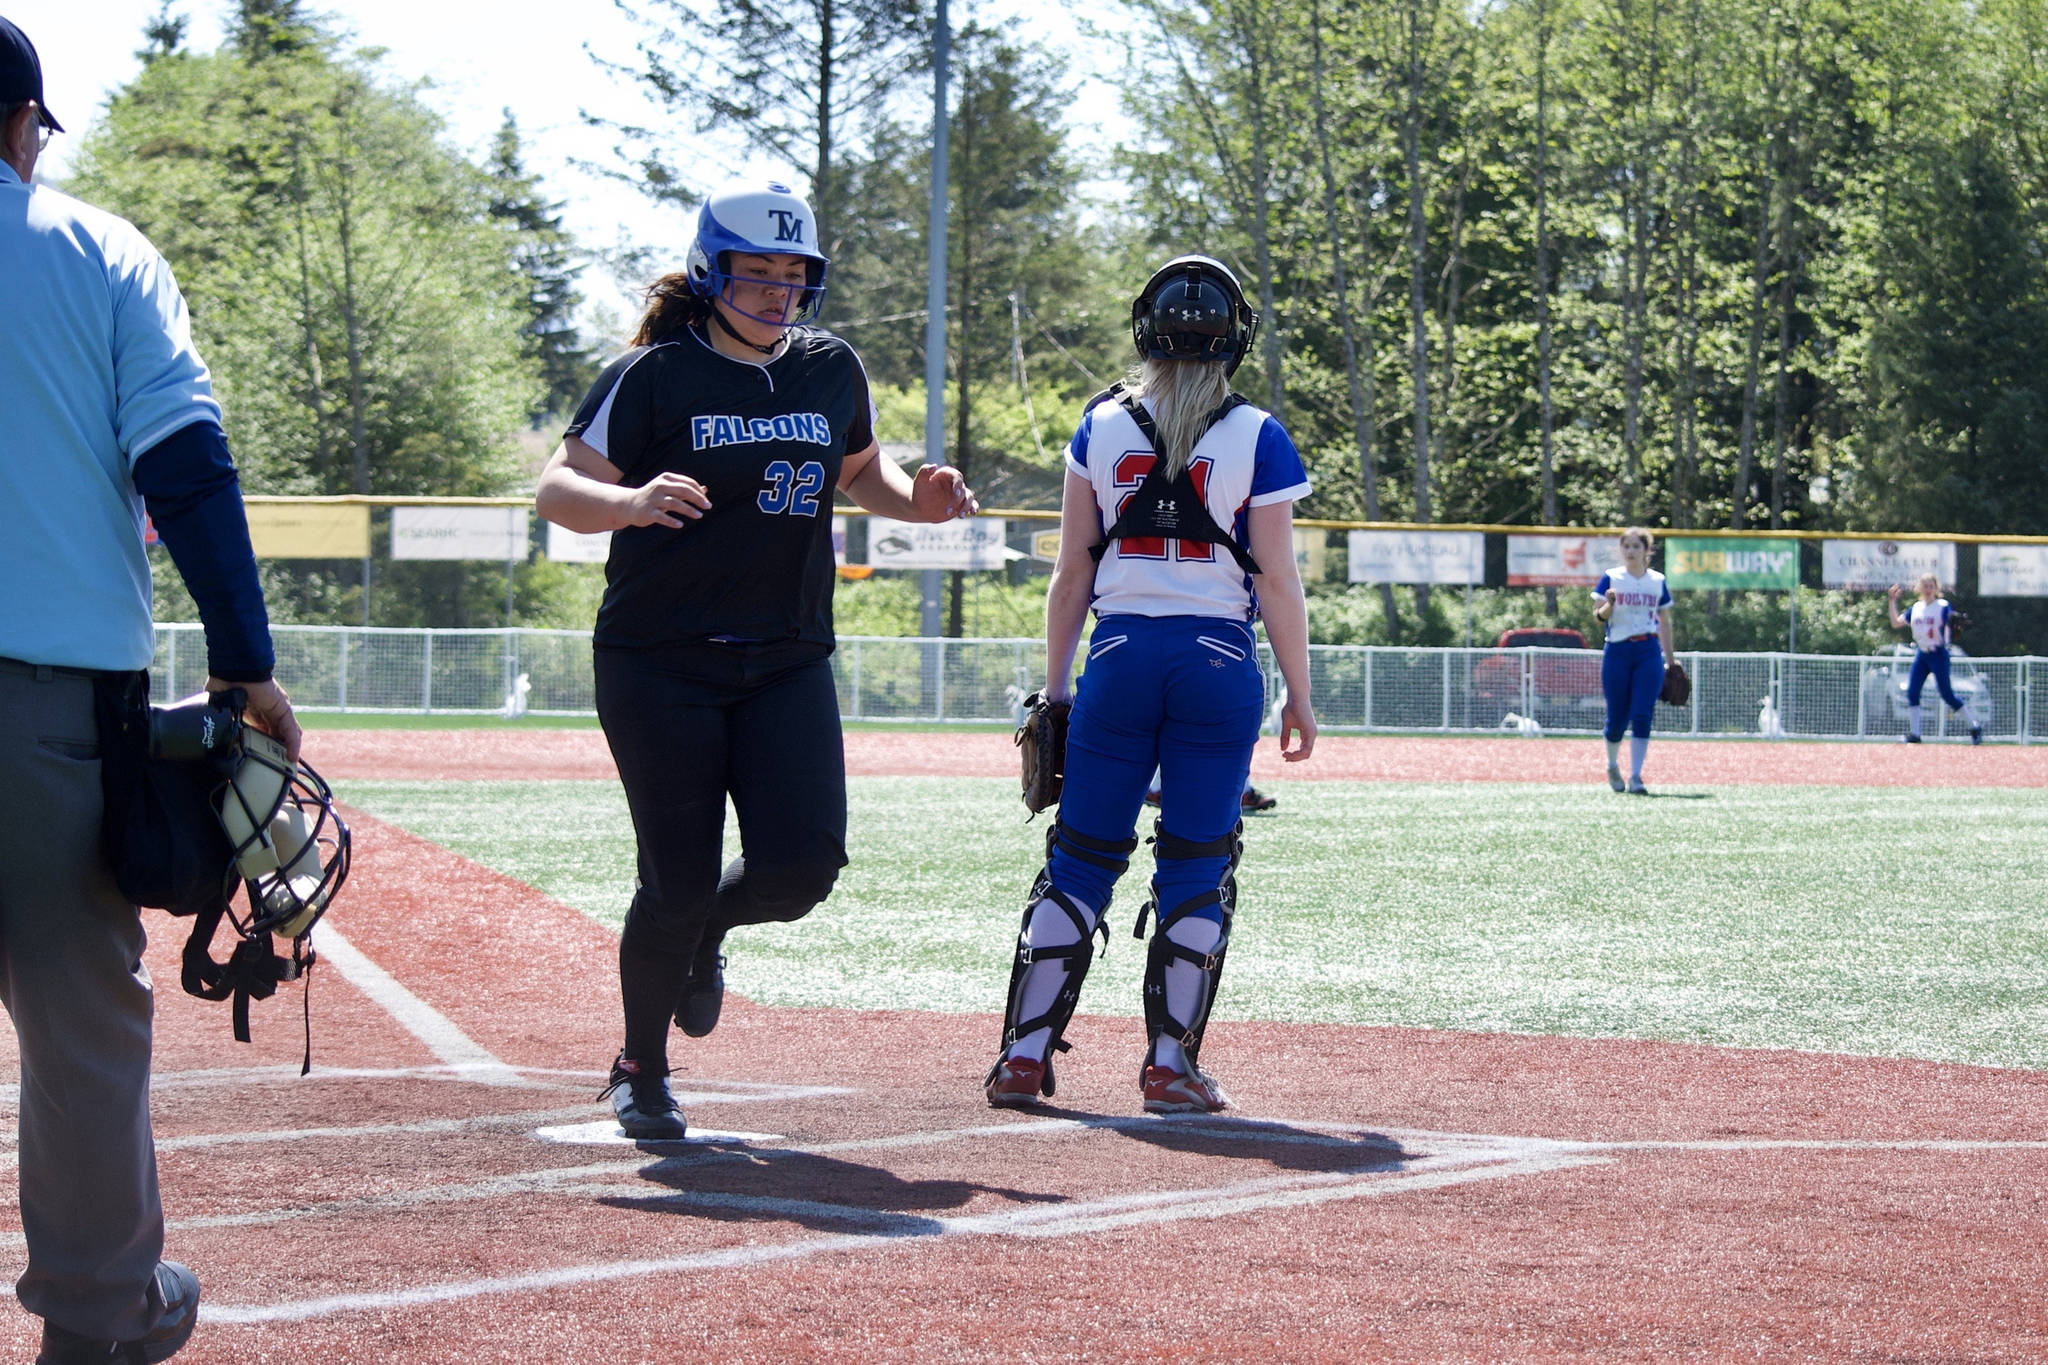 Falcons softball quest for another title falls short